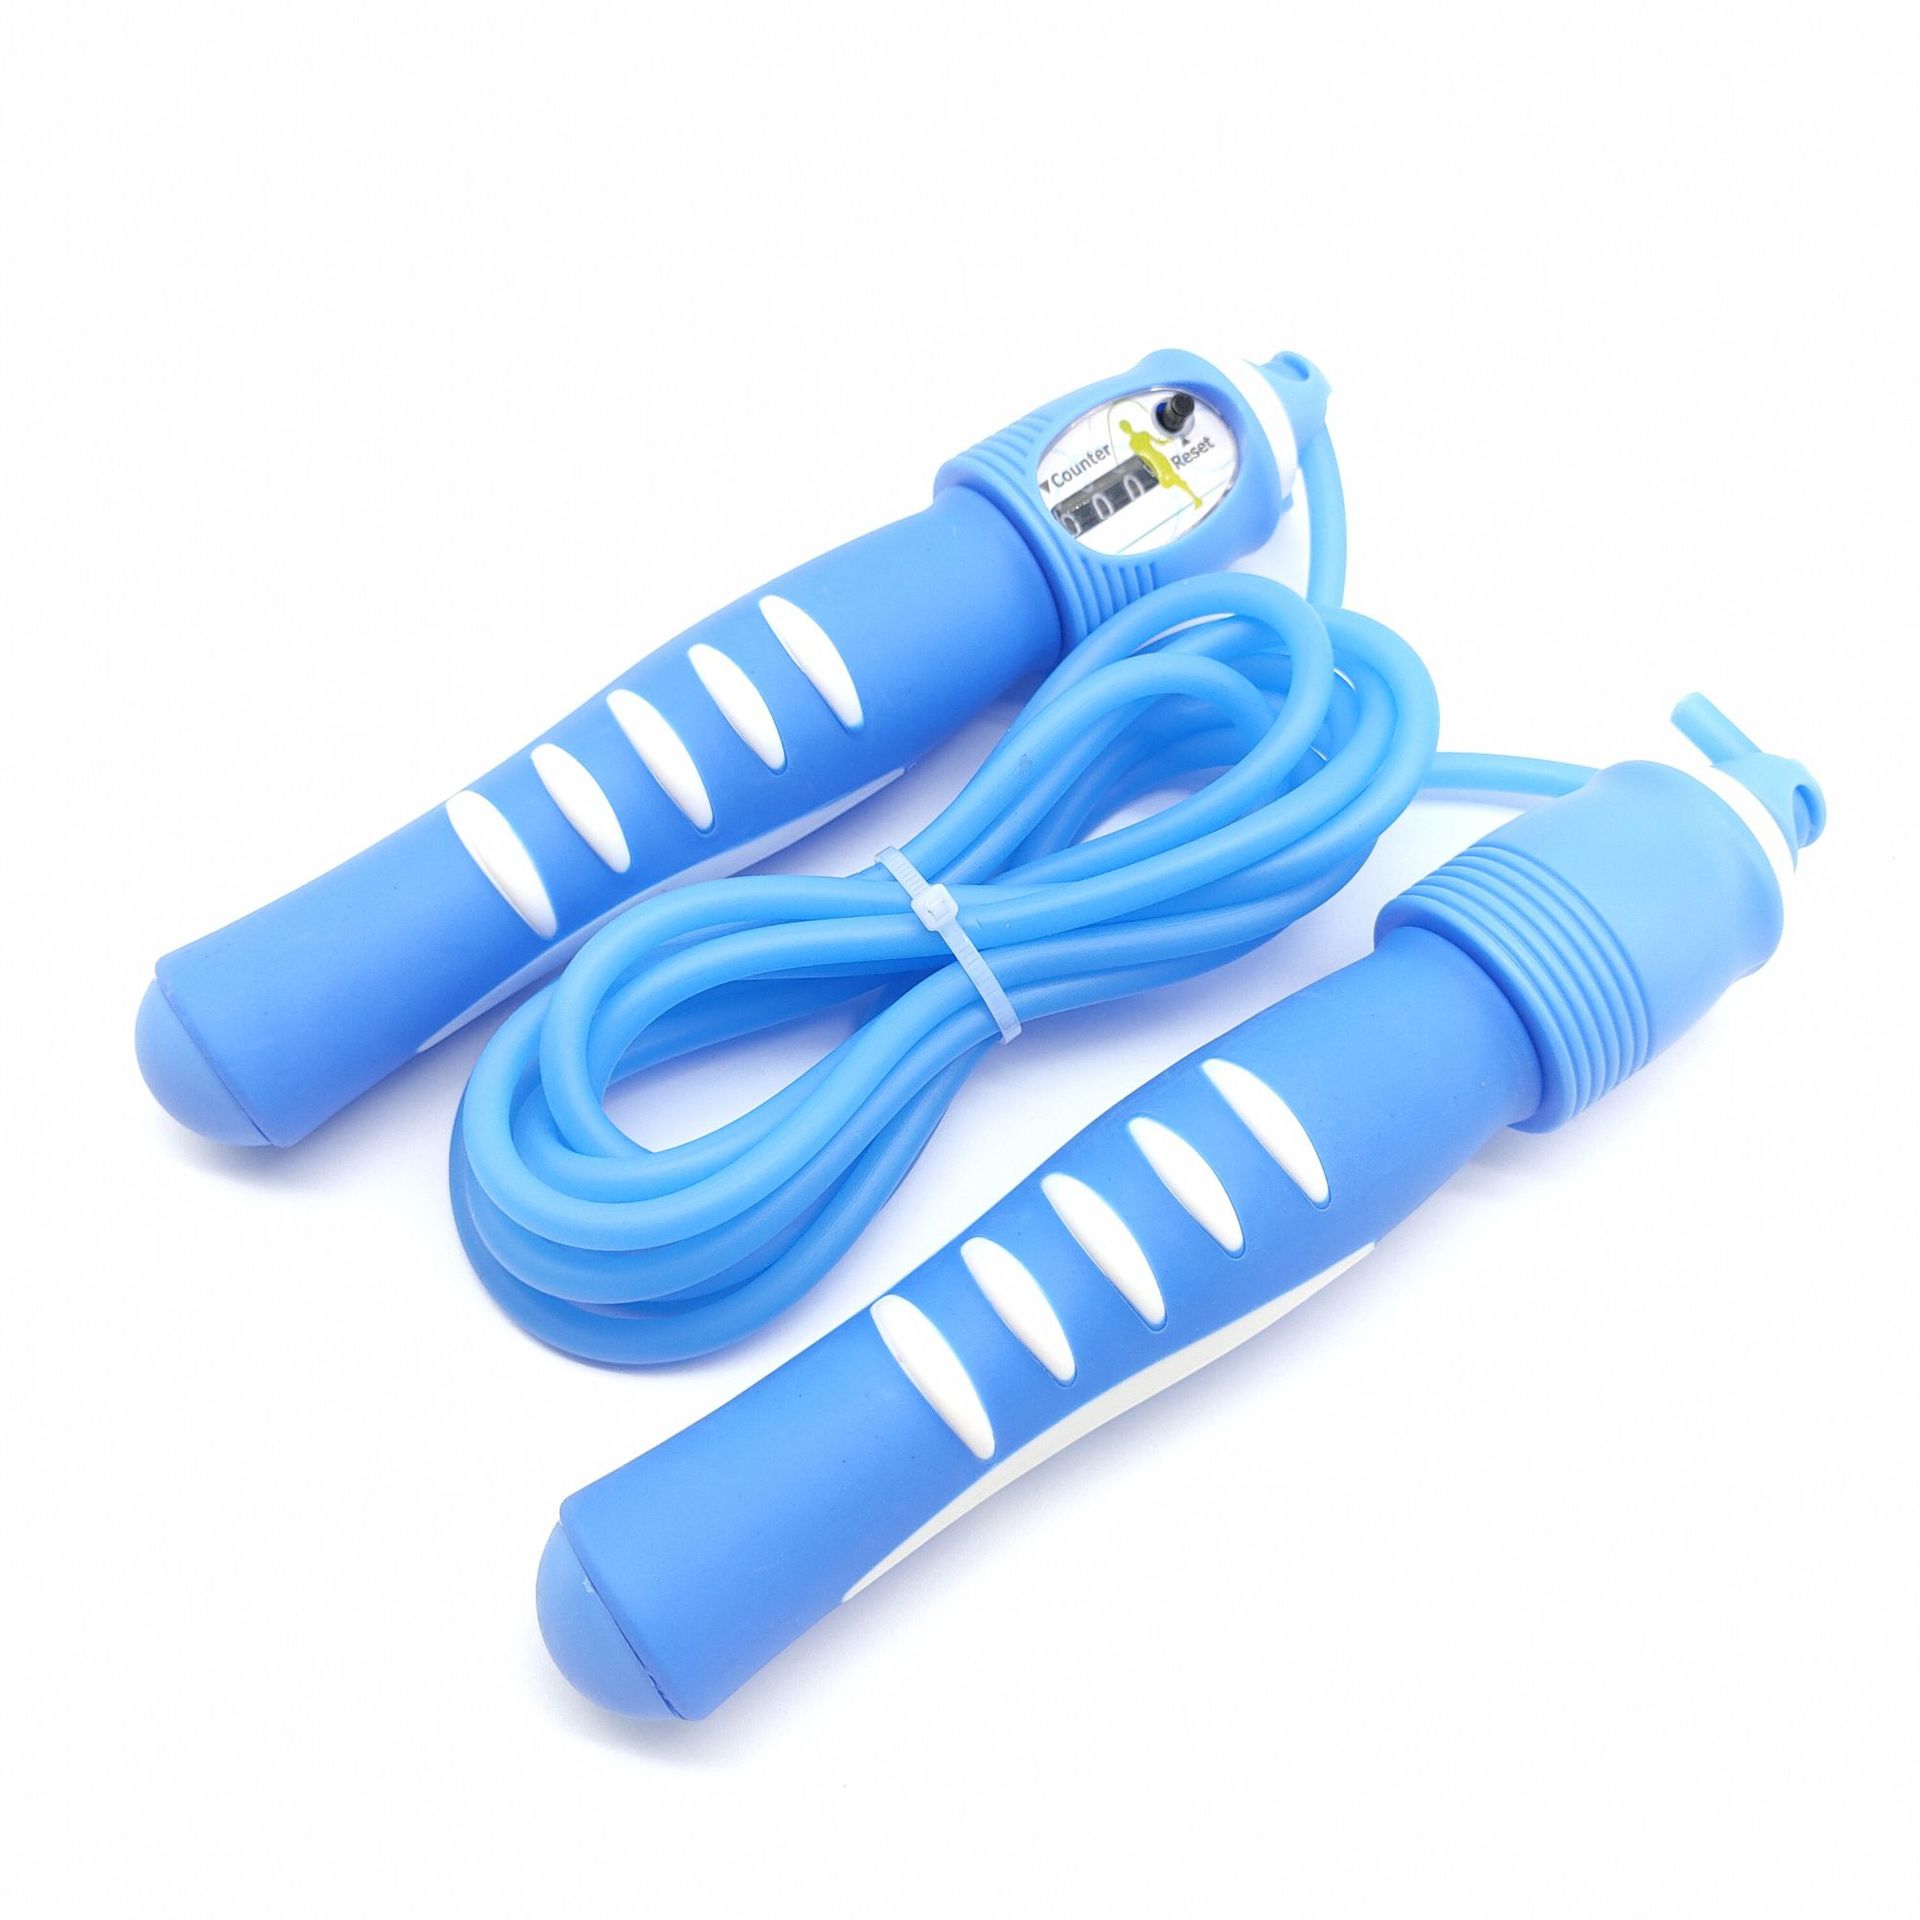 Direct supply of large handle count jump rope weight loss fitness sporting goods student training competition jump rope